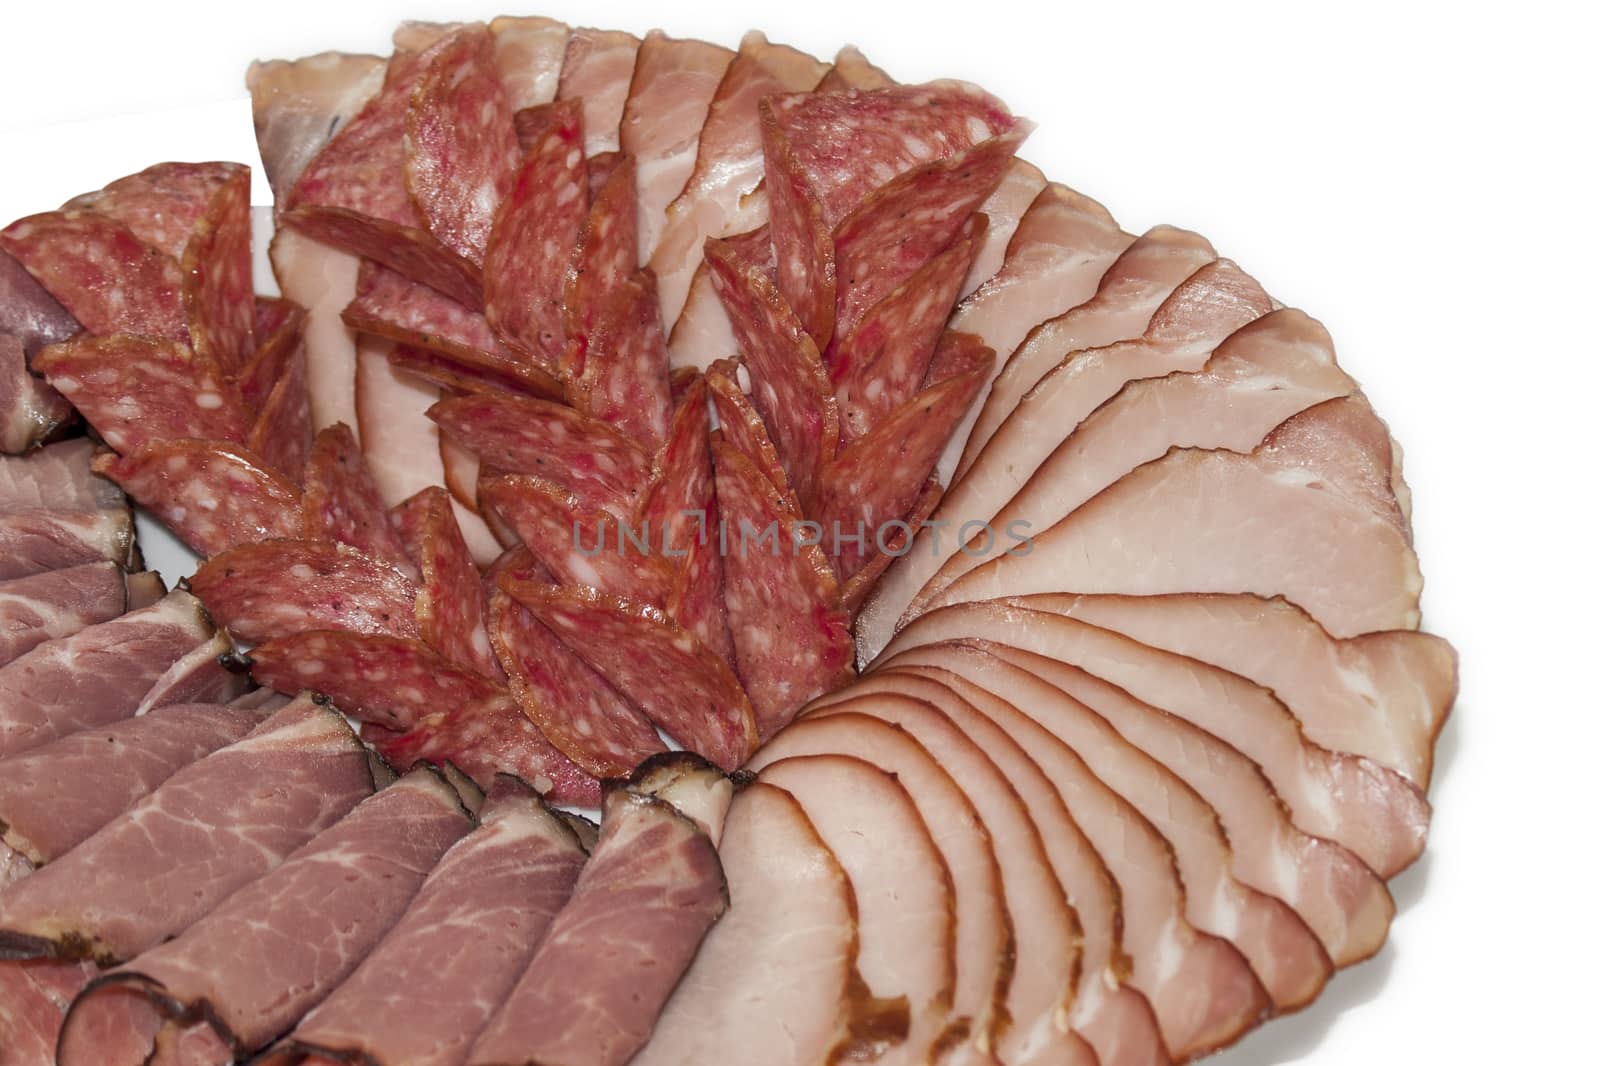 Cutted smoked sirloin, smoked ham and sausage on a plate.